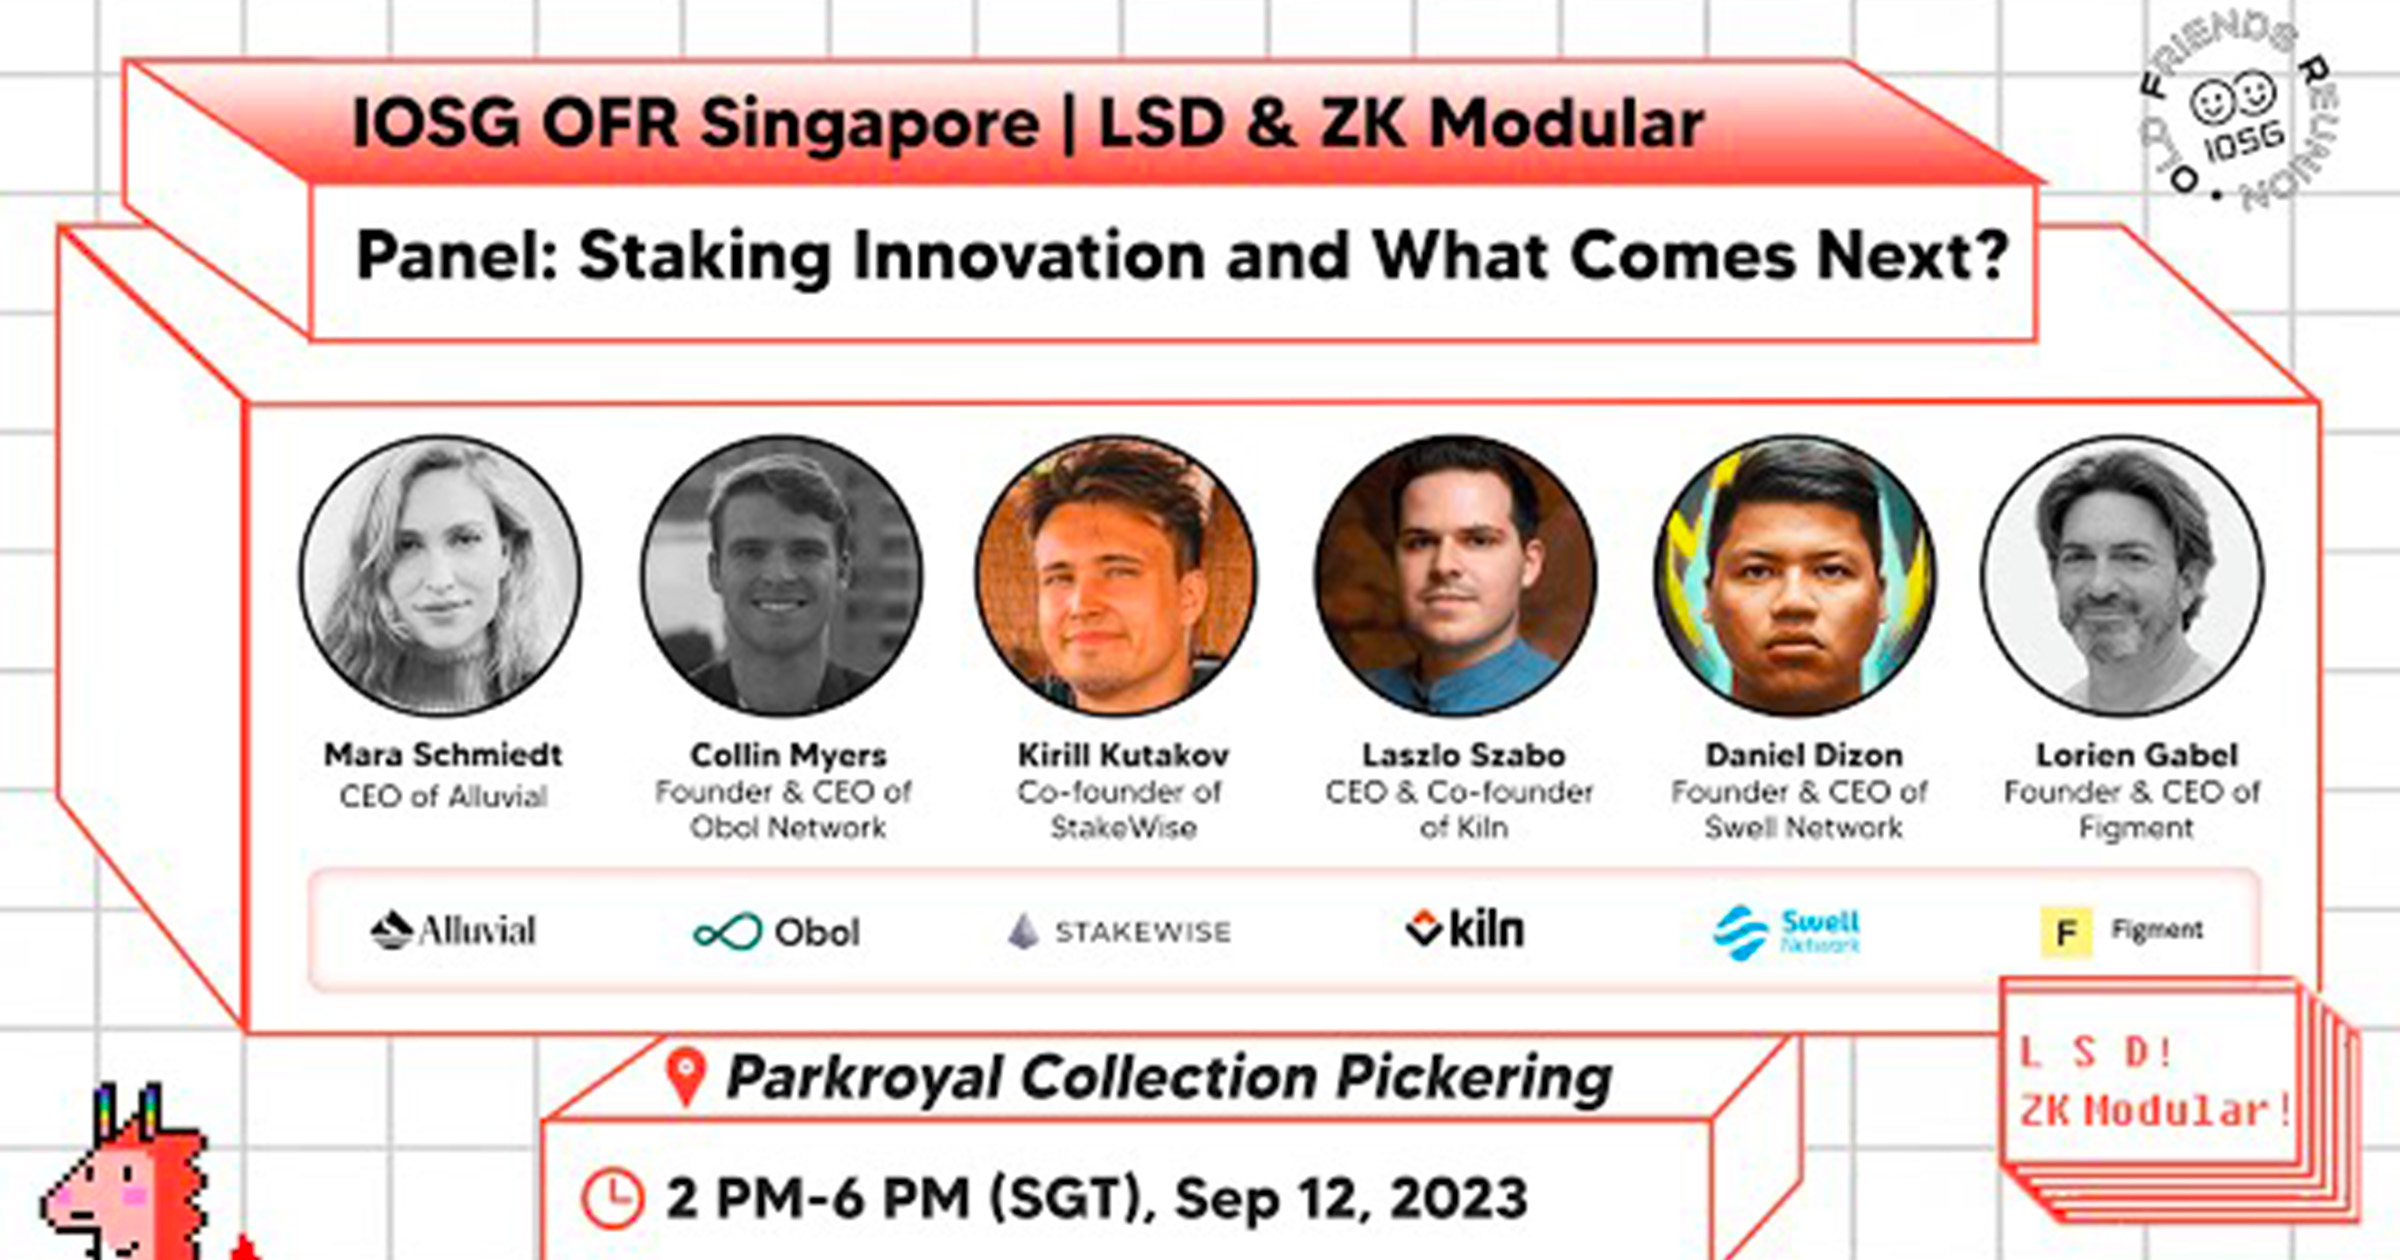 Video: “IOSG OFR Singapore Panel · Staking Innovation and What Comes Next?”